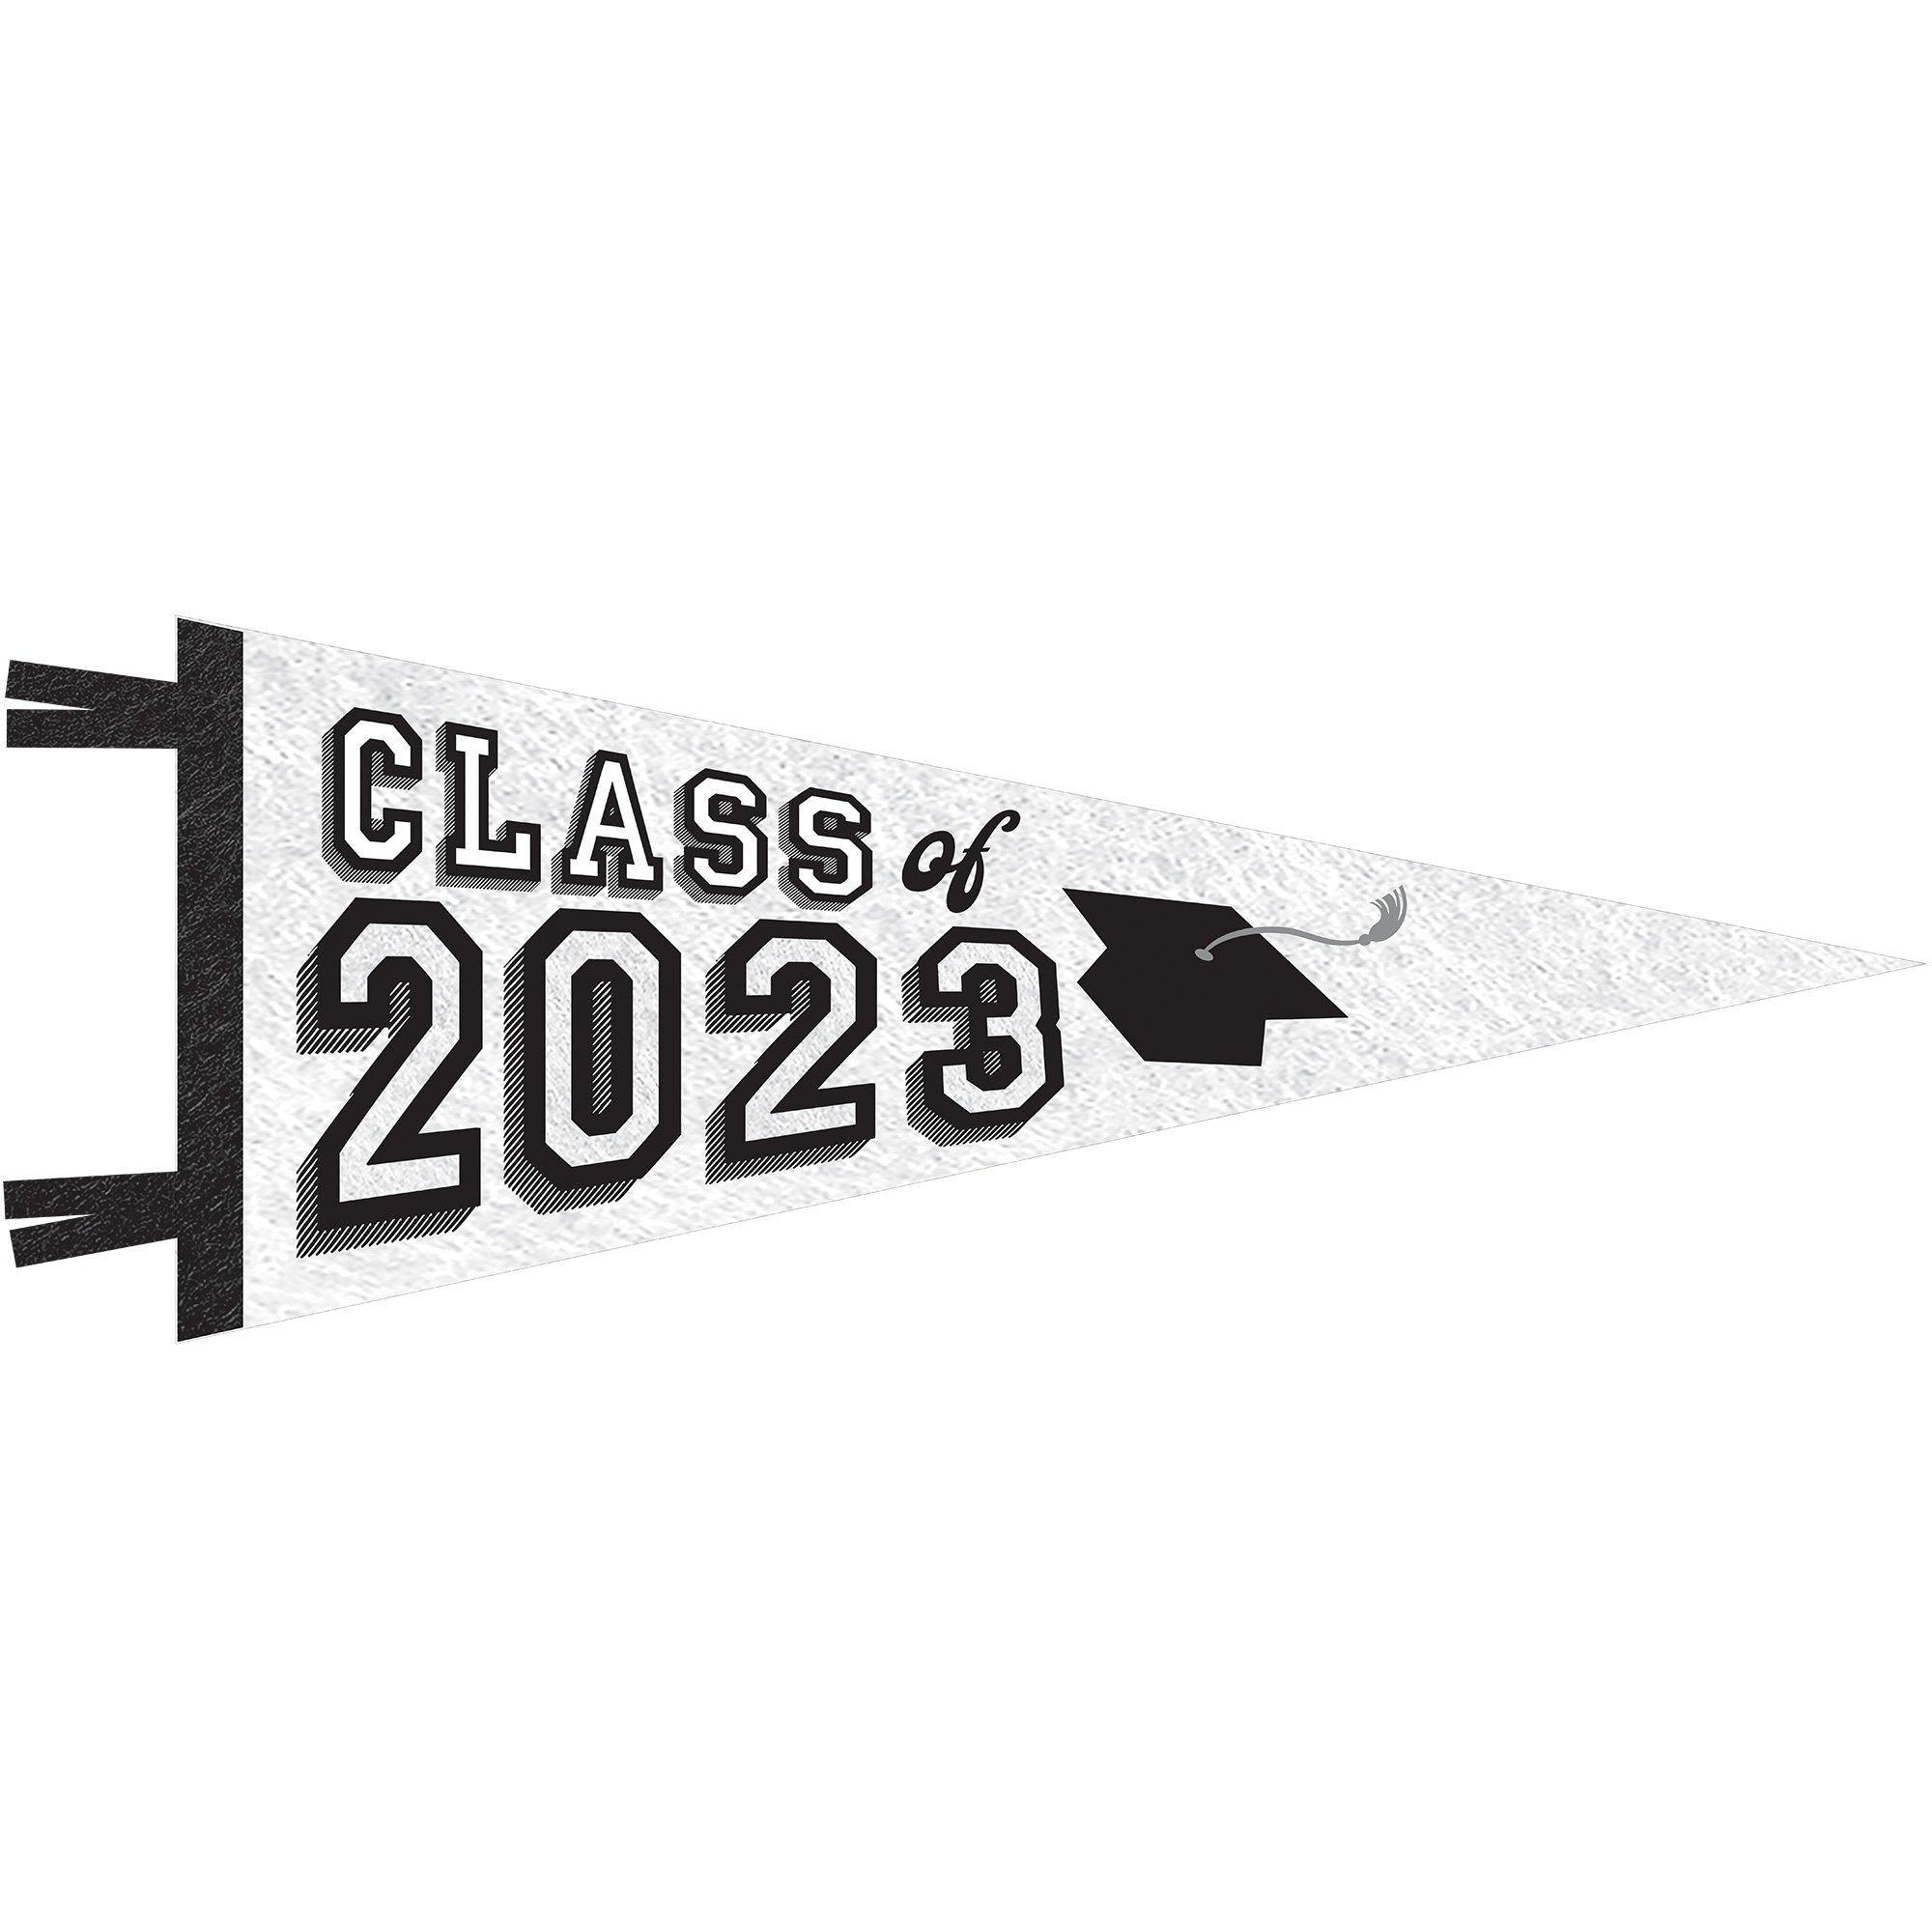 Graduation Party Supplies Kit for 20 with Decorations, Banners, Balloons, Plates, Napkins - White Congrats Grad